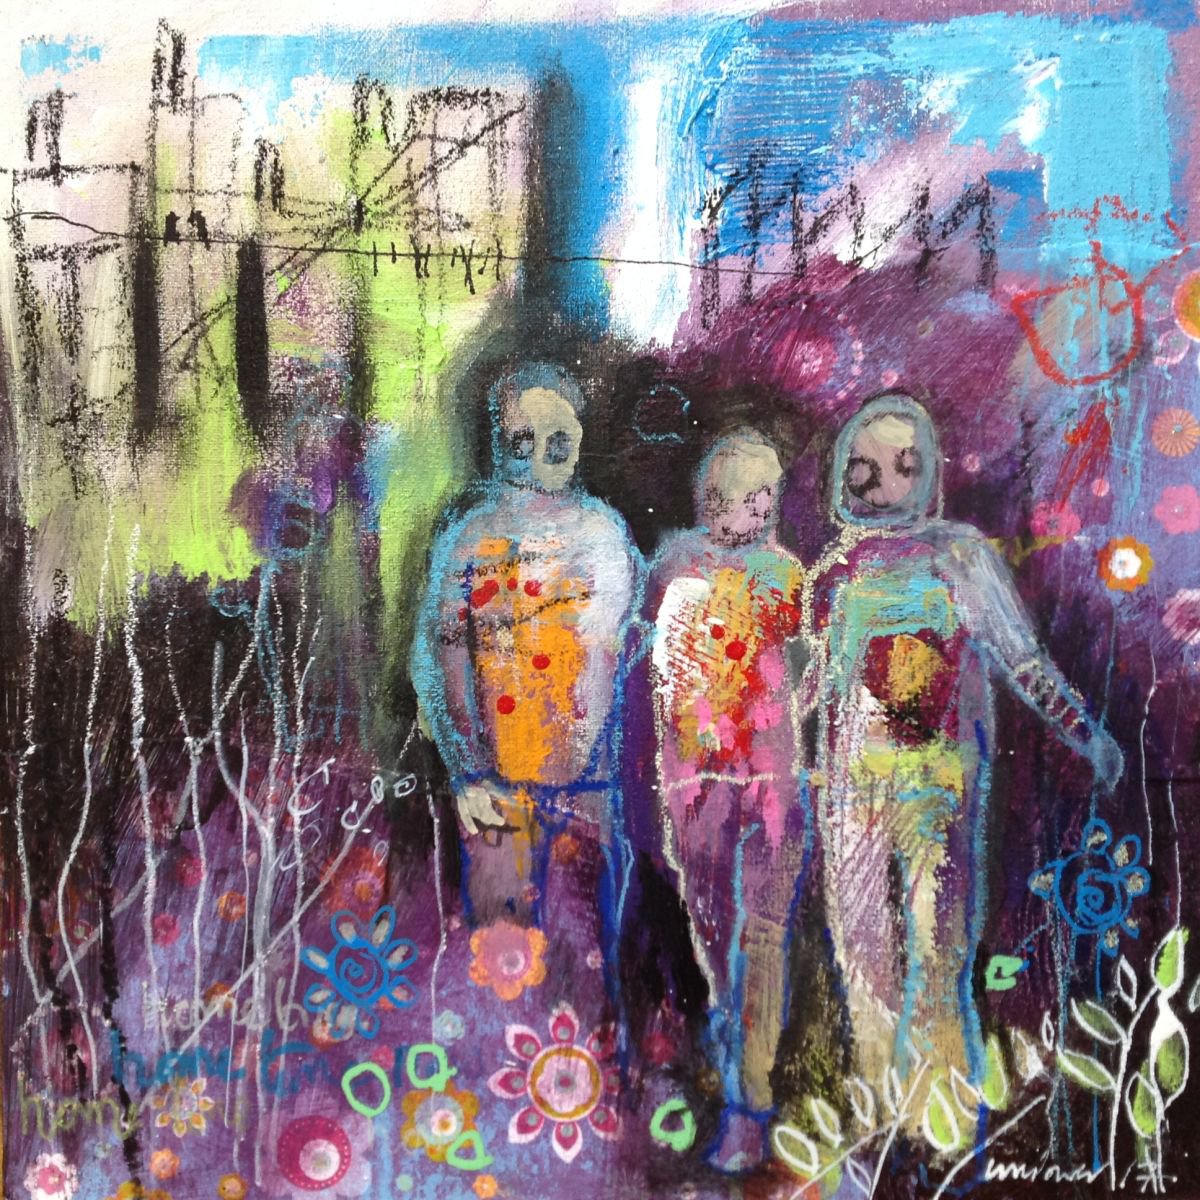 Hometime Now - 8 x 8 mixed media on board by Luci Power